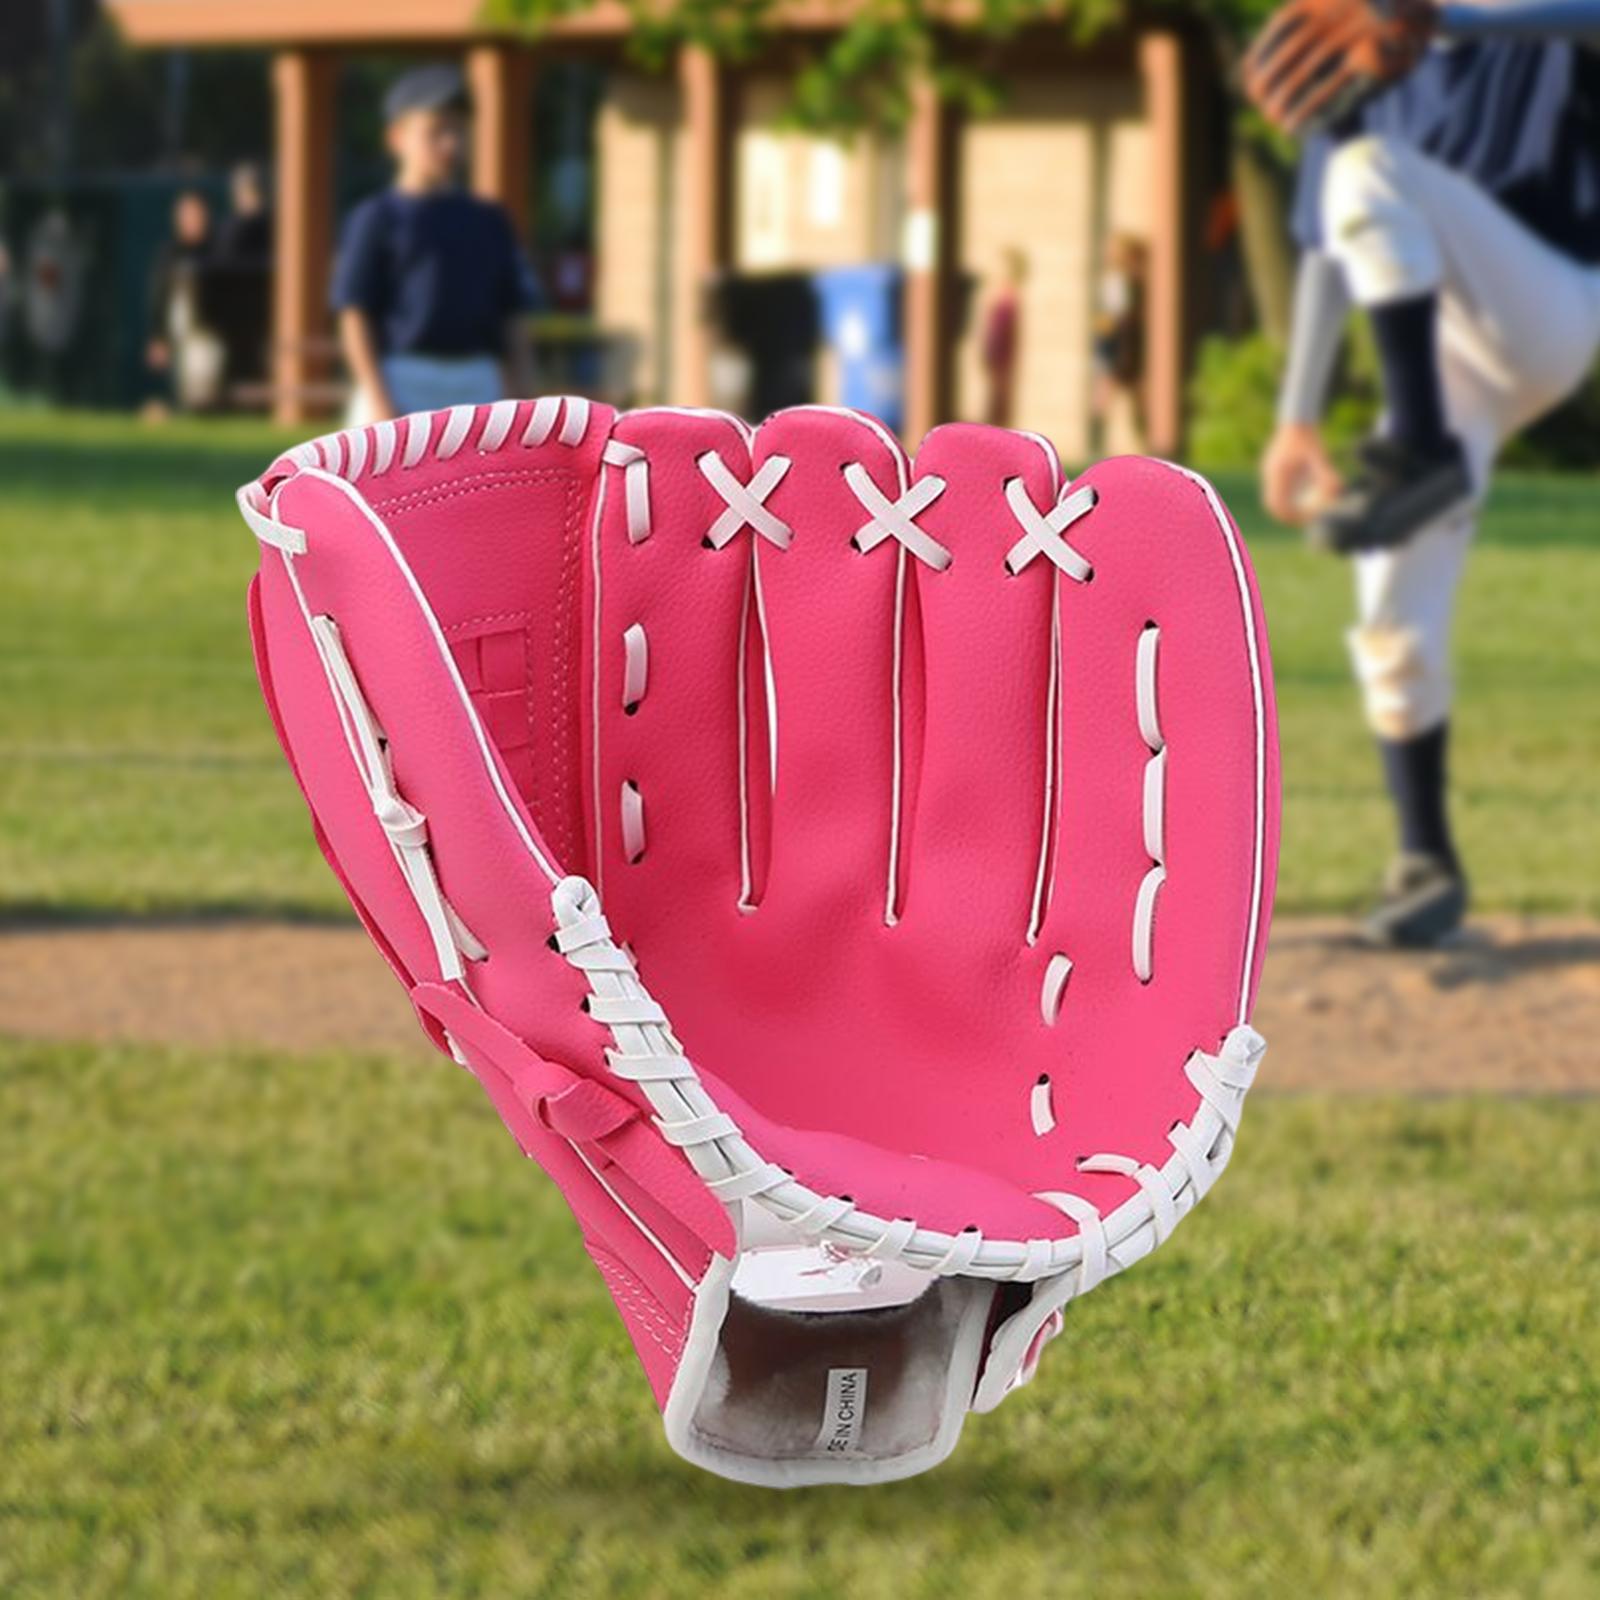 Baseball Glove Infield Pitcher Gloves Durable for Beginner Play Training 12.5inch